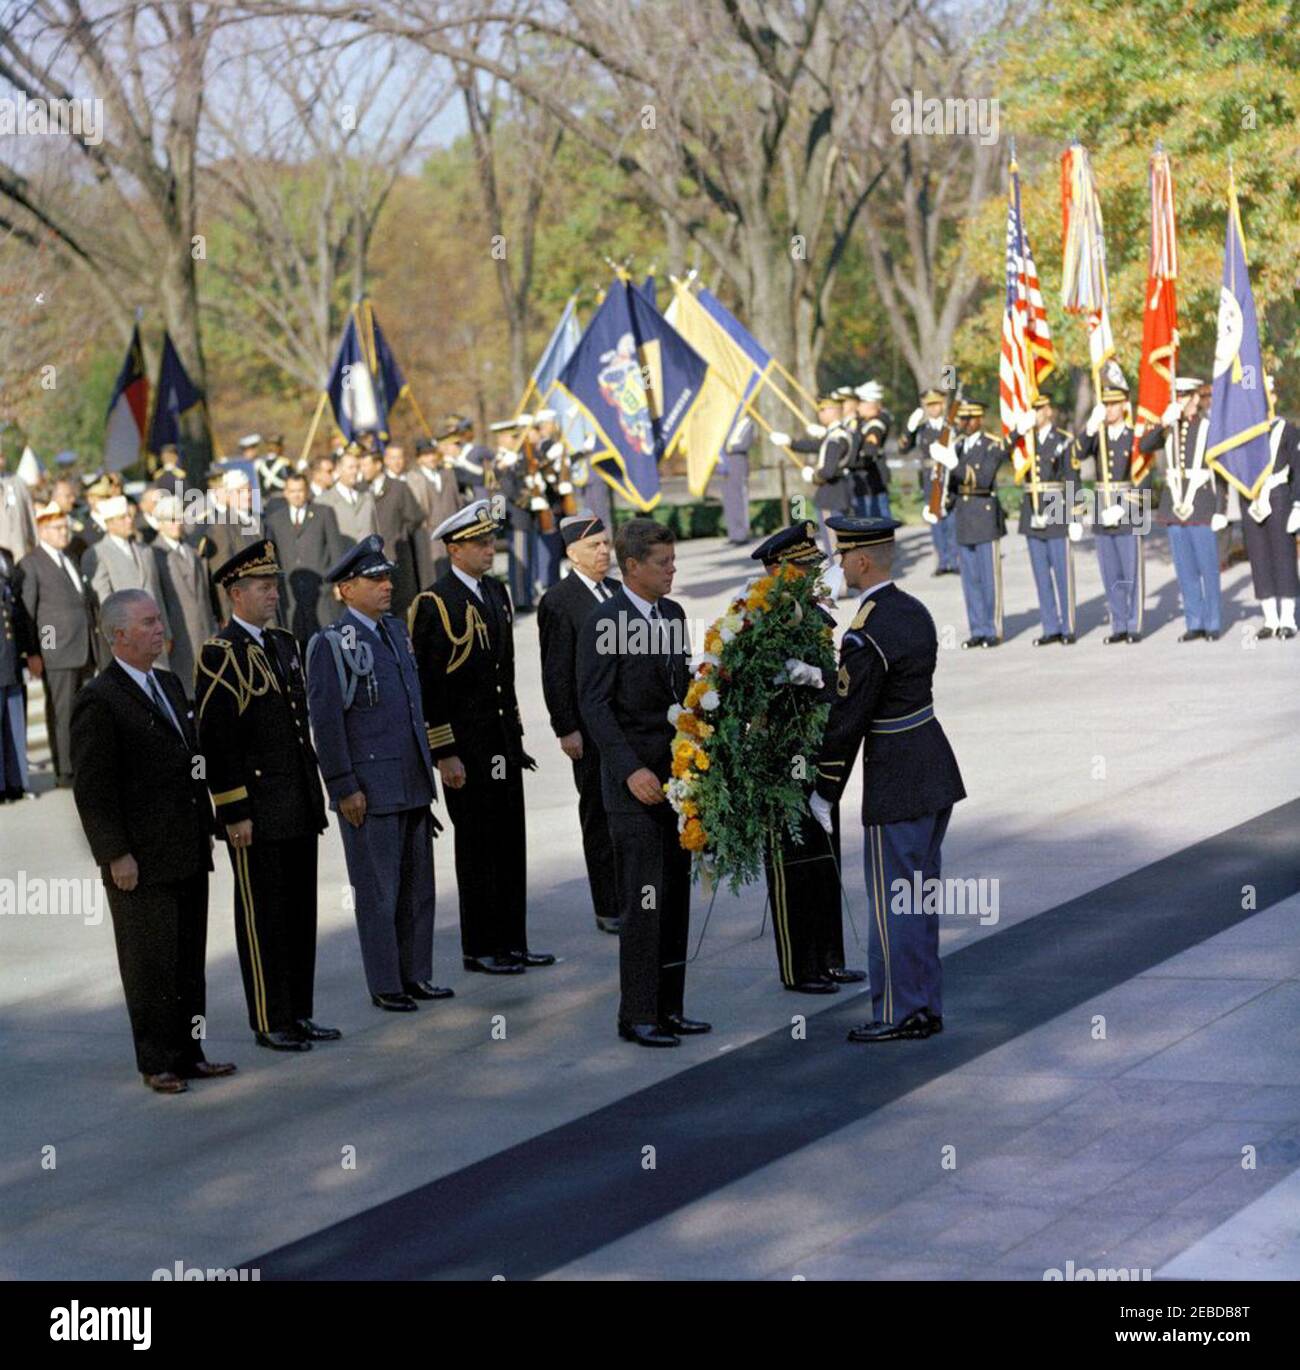 Address at Veterans Day Ceremonies, Arlington National Cemetery, 11:01AM. President John F. Kennedy participates in a wreath laying ceremony at the Tomb of the Unknown Soldier as part of Veterans Day remembrances. President Kennedy stands with Major General Paul A. Gavan, Commanding General of the Military District of Washington. Standing behind the President (L-R): John S. Gleason, Administrator of Veterans Affairs; Military Aide to the President General Chester V. Clifton; Air Force Aide to the President Colonel Godfrey T. McHugh; Naval Aide to the President Captain Tazewell T. Shepard; and Stock Photo